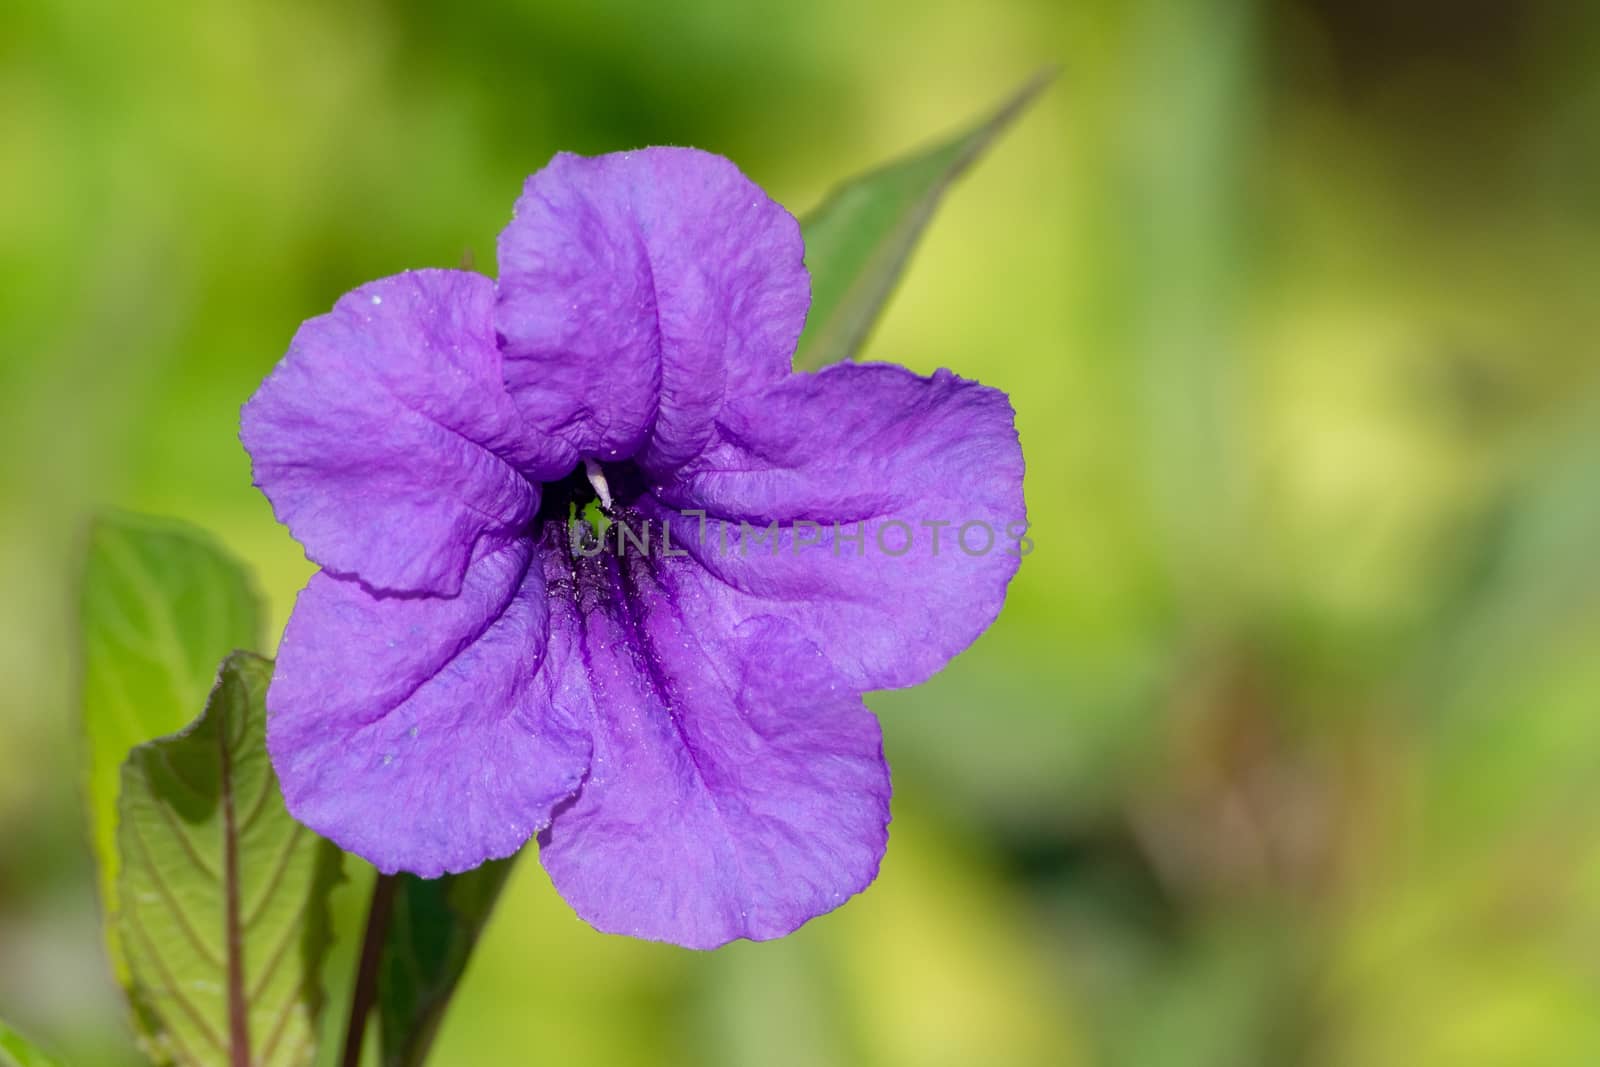 One beautiful close up of a purple wild petunia (fringeleaf wild petunia, hairy petunia, low wild petunia) with green background.